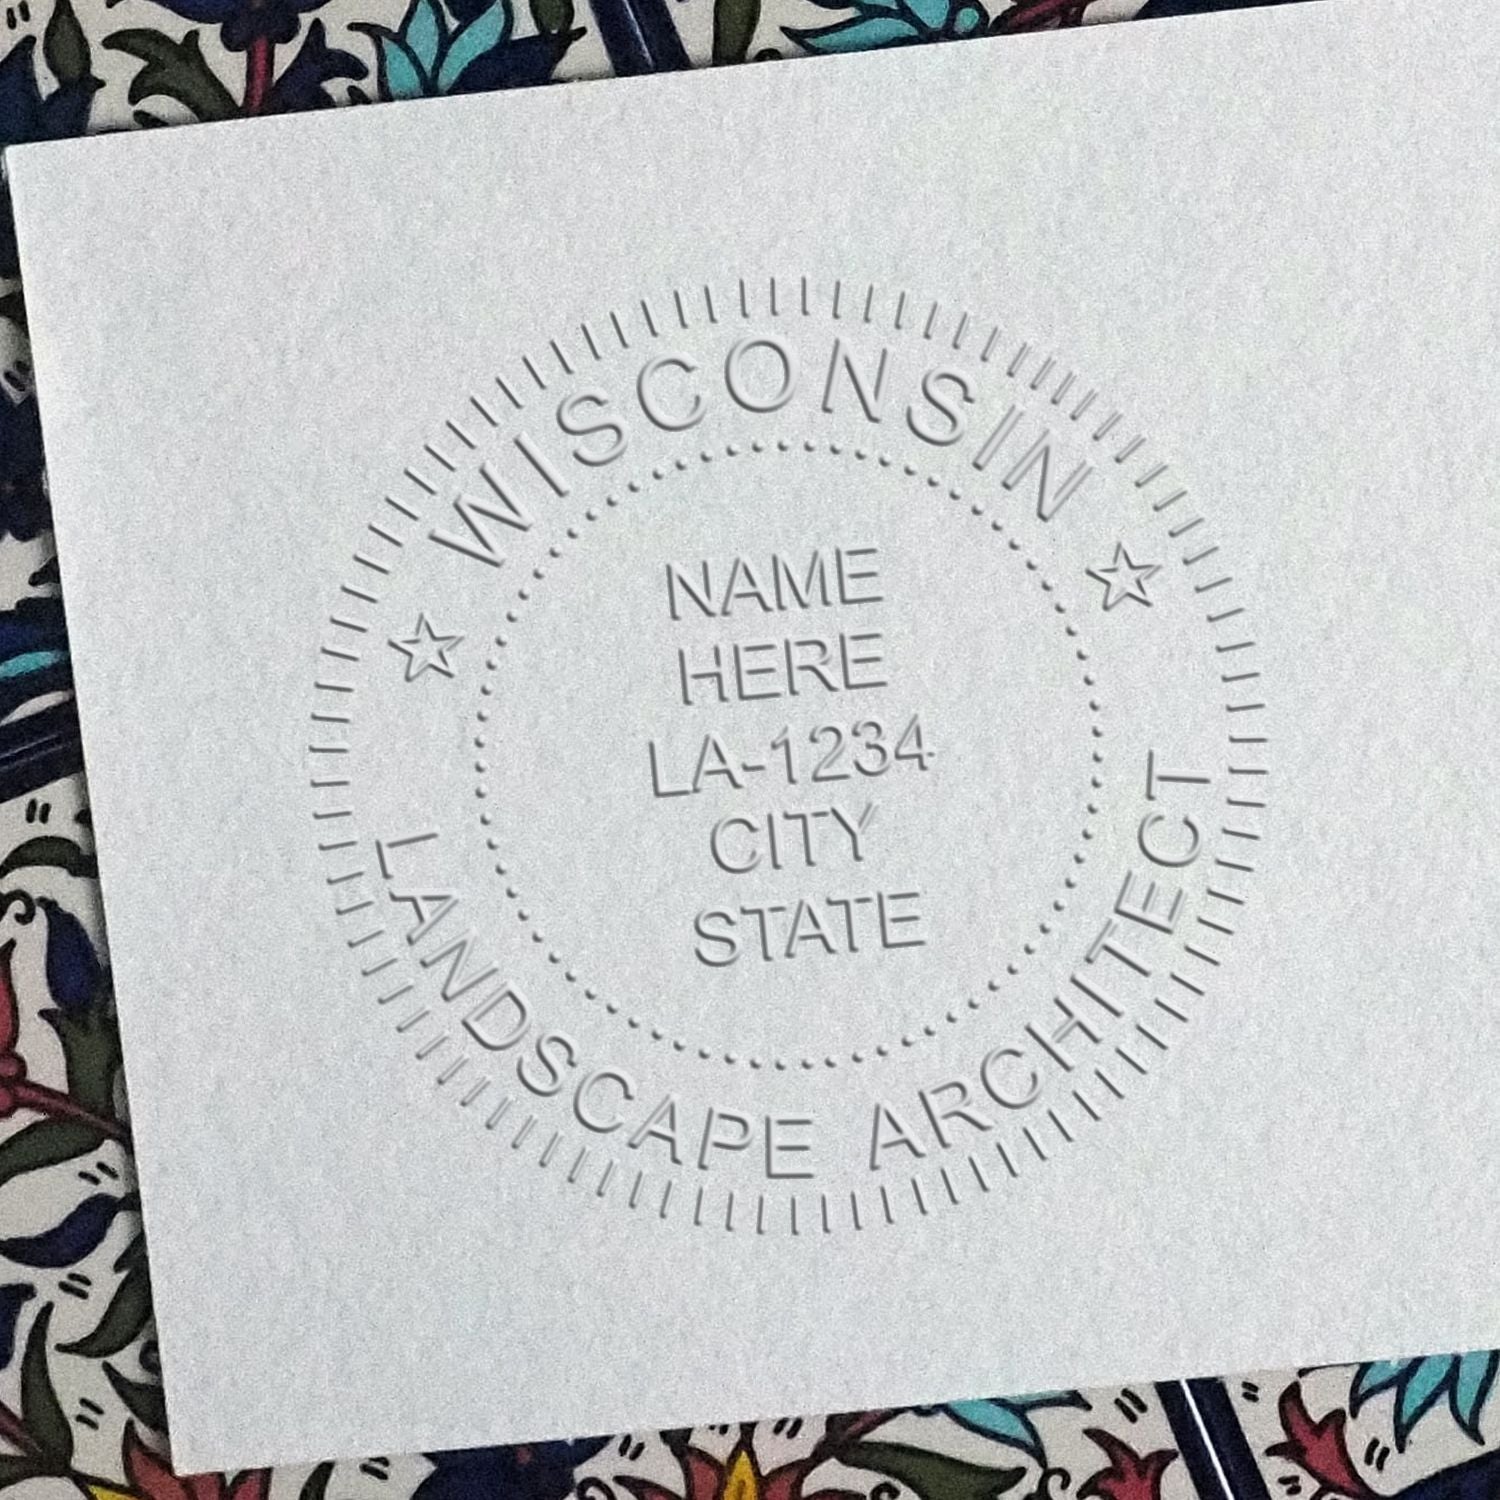 Wisconsin Landscape Architects: Secure Your Validity with Stamp and Seal Application Feature Image